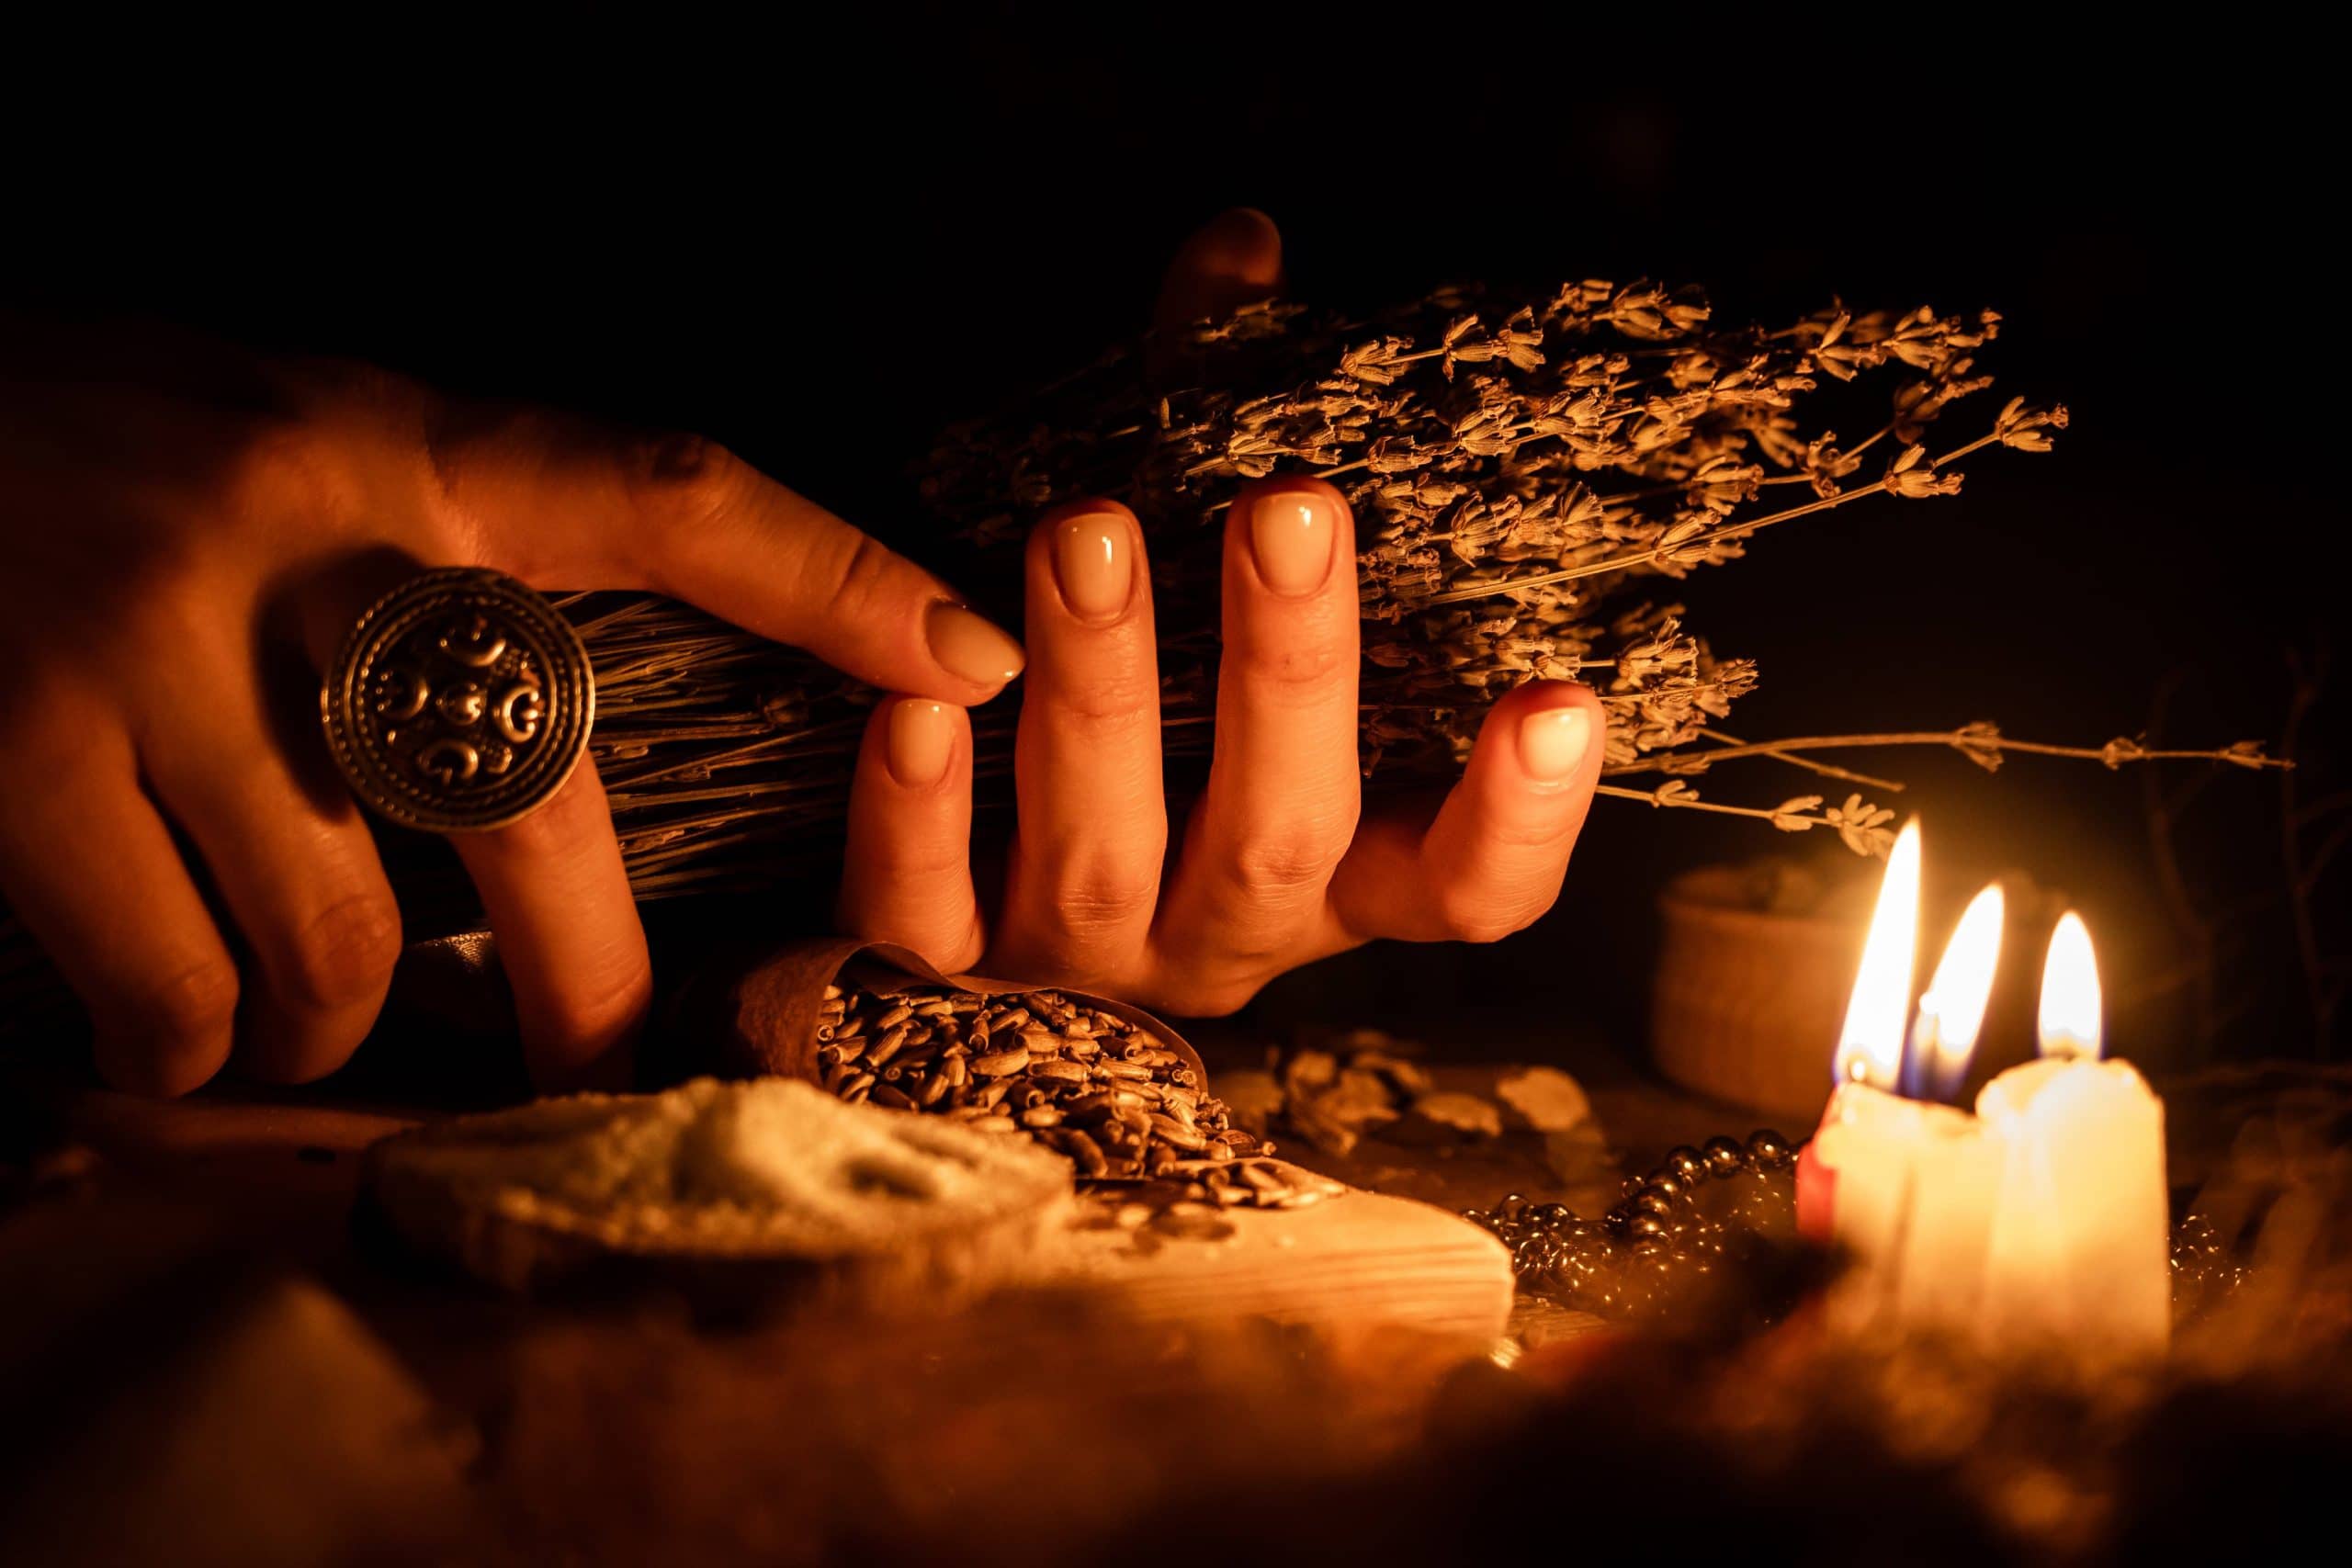 In the hands of the witches bunch of dry herbs for divination. The light from the candles on the old magic table. Attributes of occultism and magic.